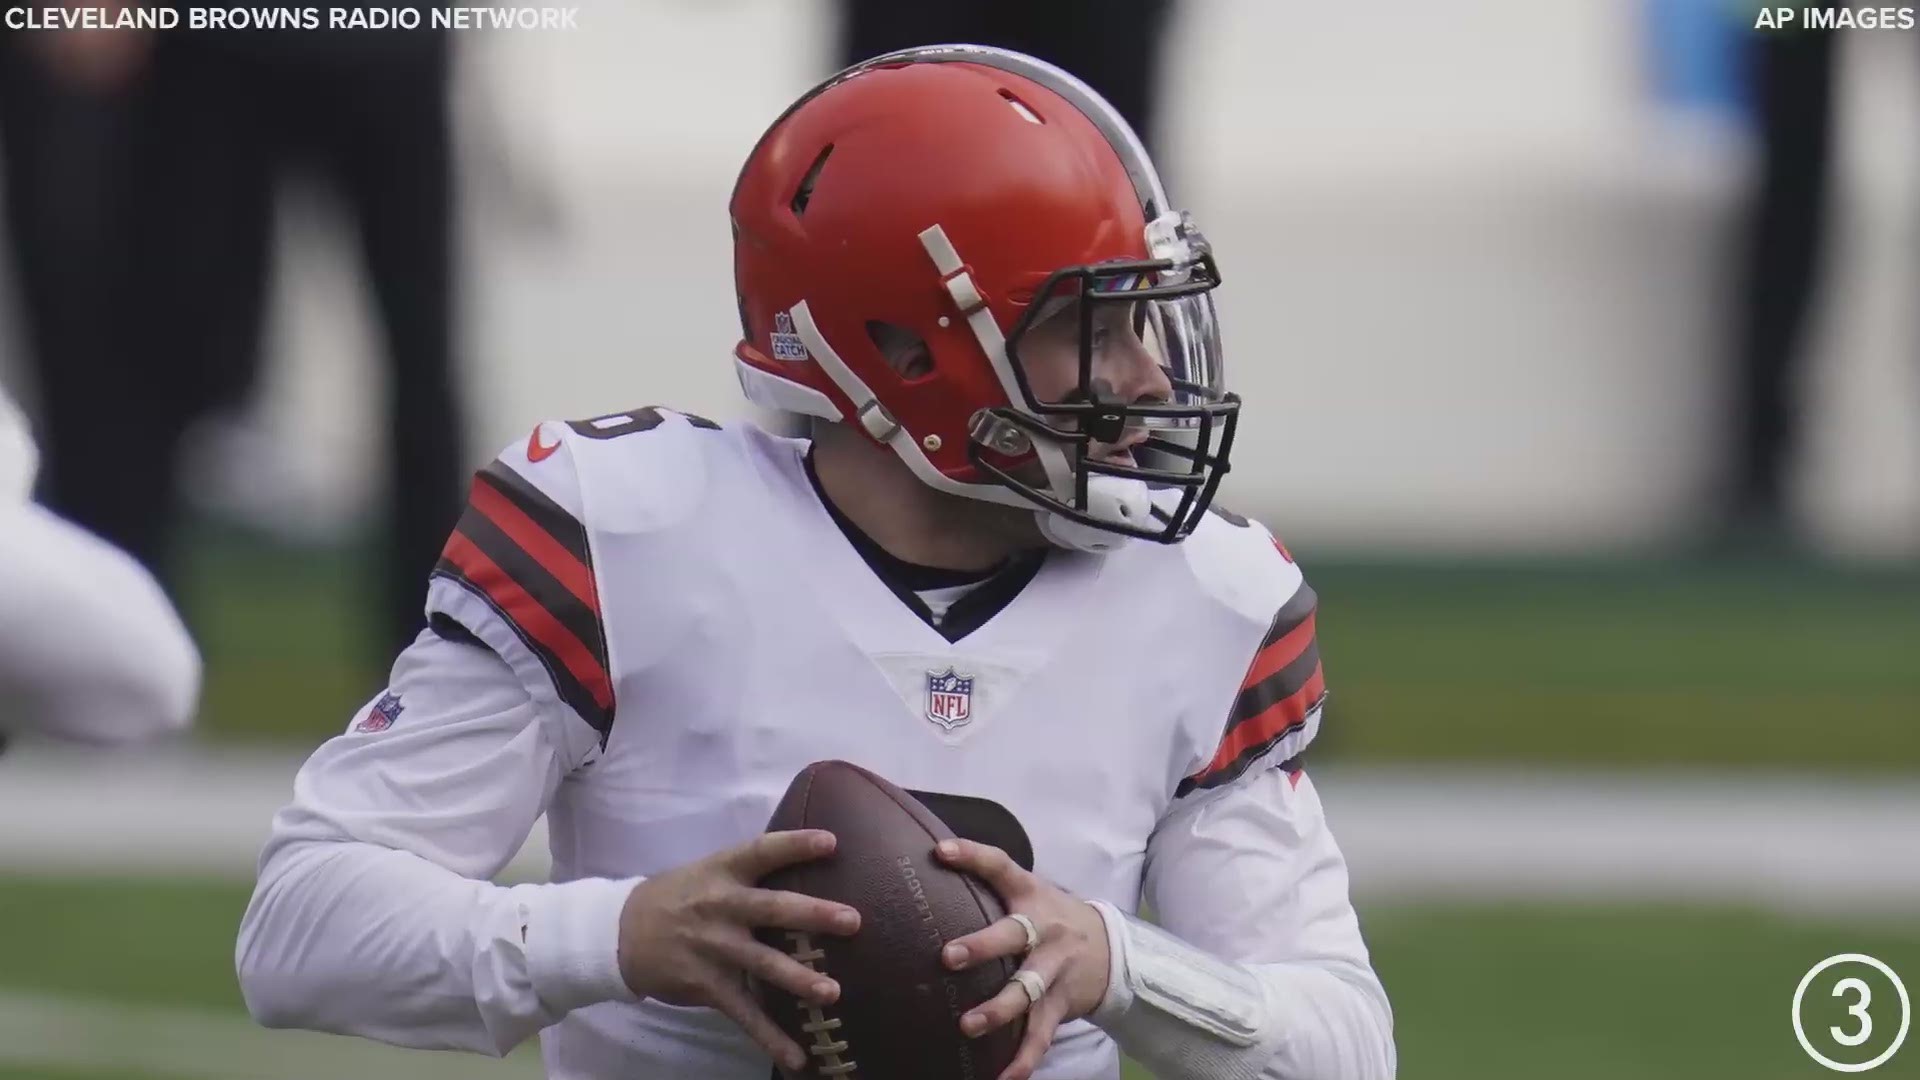 Baker Mayfield gave the Cleveland Browns' a 24-20 lead over the Cincinnati Bengals with a fourth quarter touchdown pass to David Njoku.